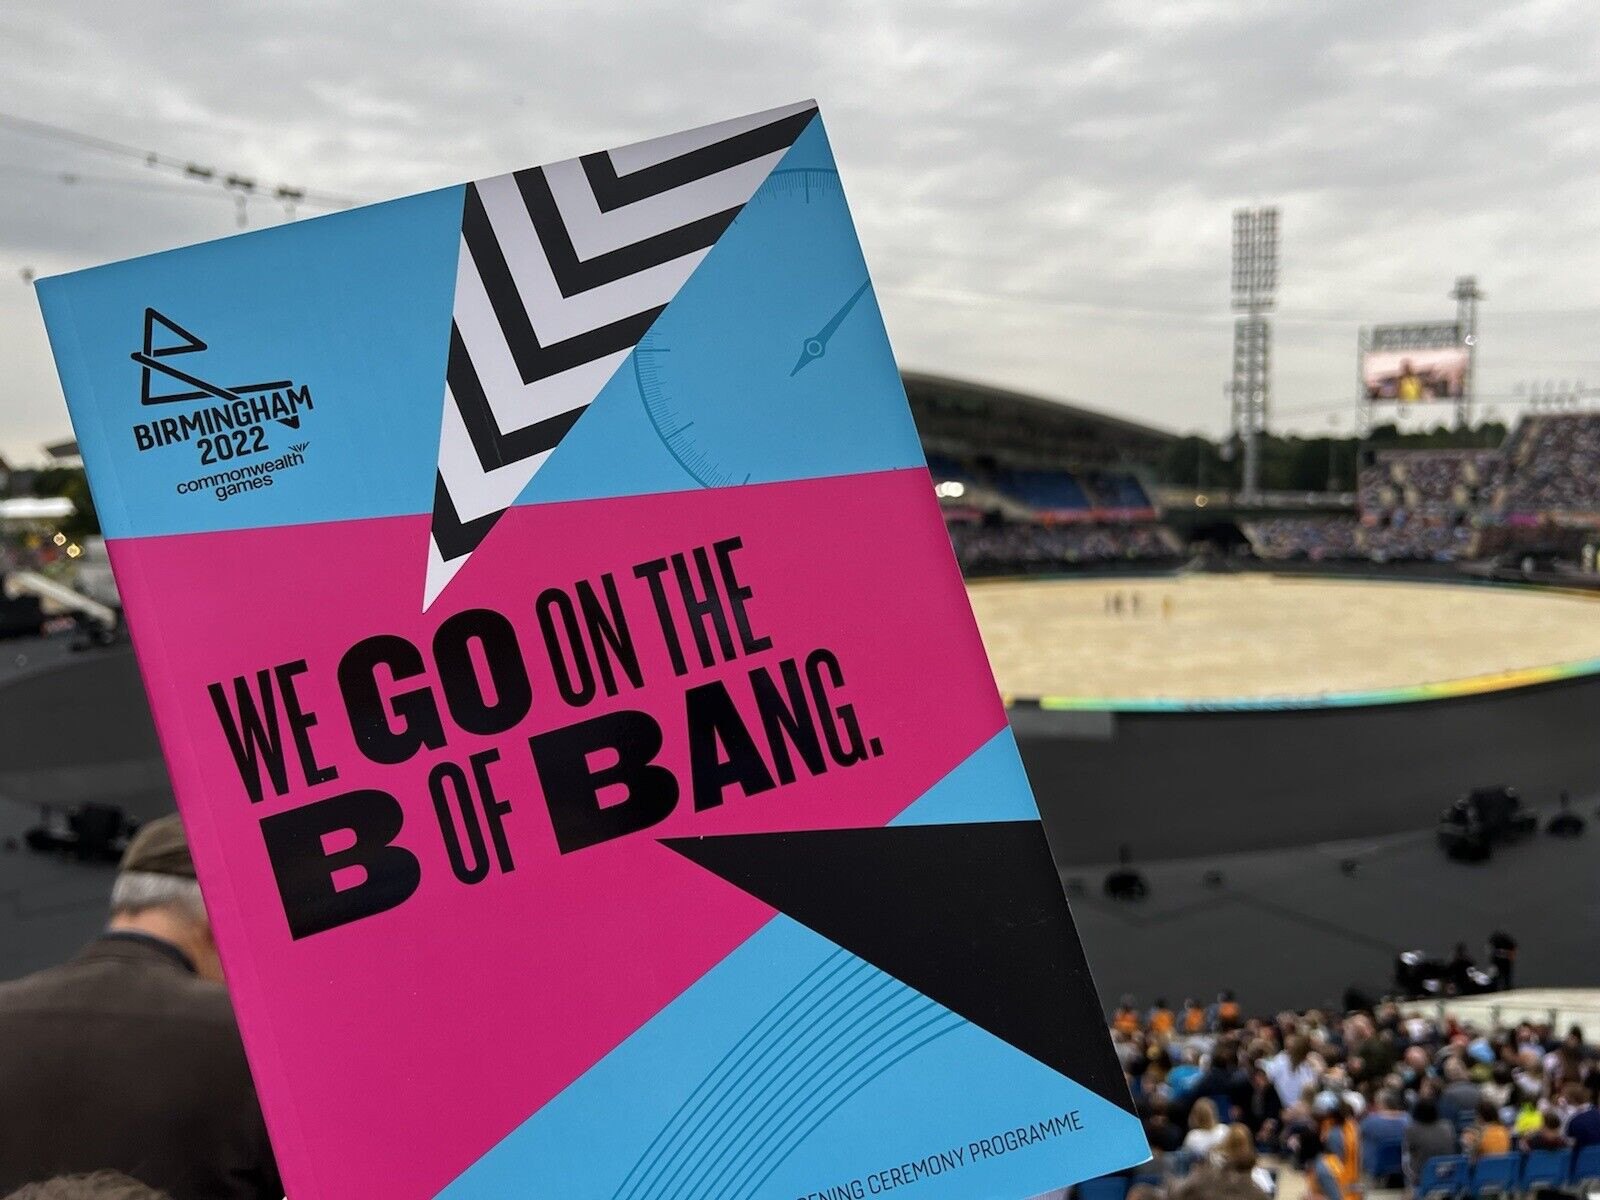 Birmingham 2022 denies "We go on the b of bang" slogan has anything do with Manchester or drugs cheat Christie